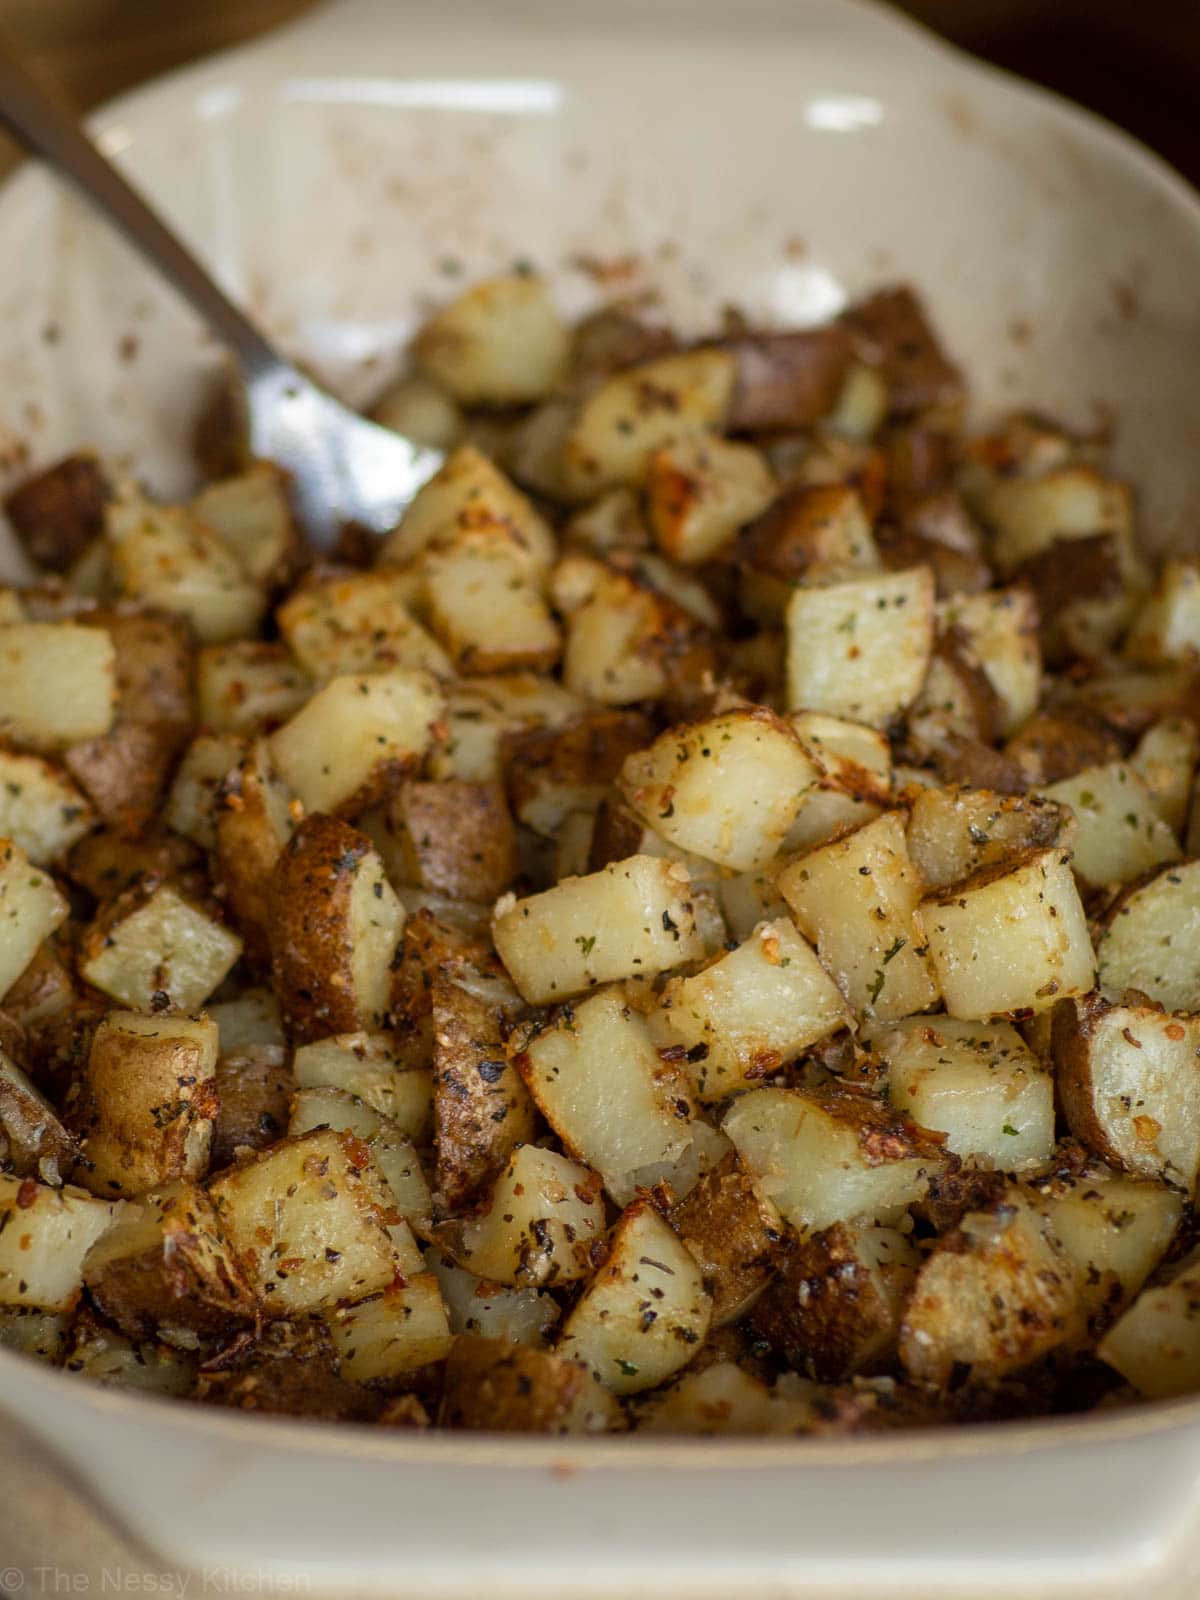 Baking pan of onion roasted potatoes with a serving spoon.